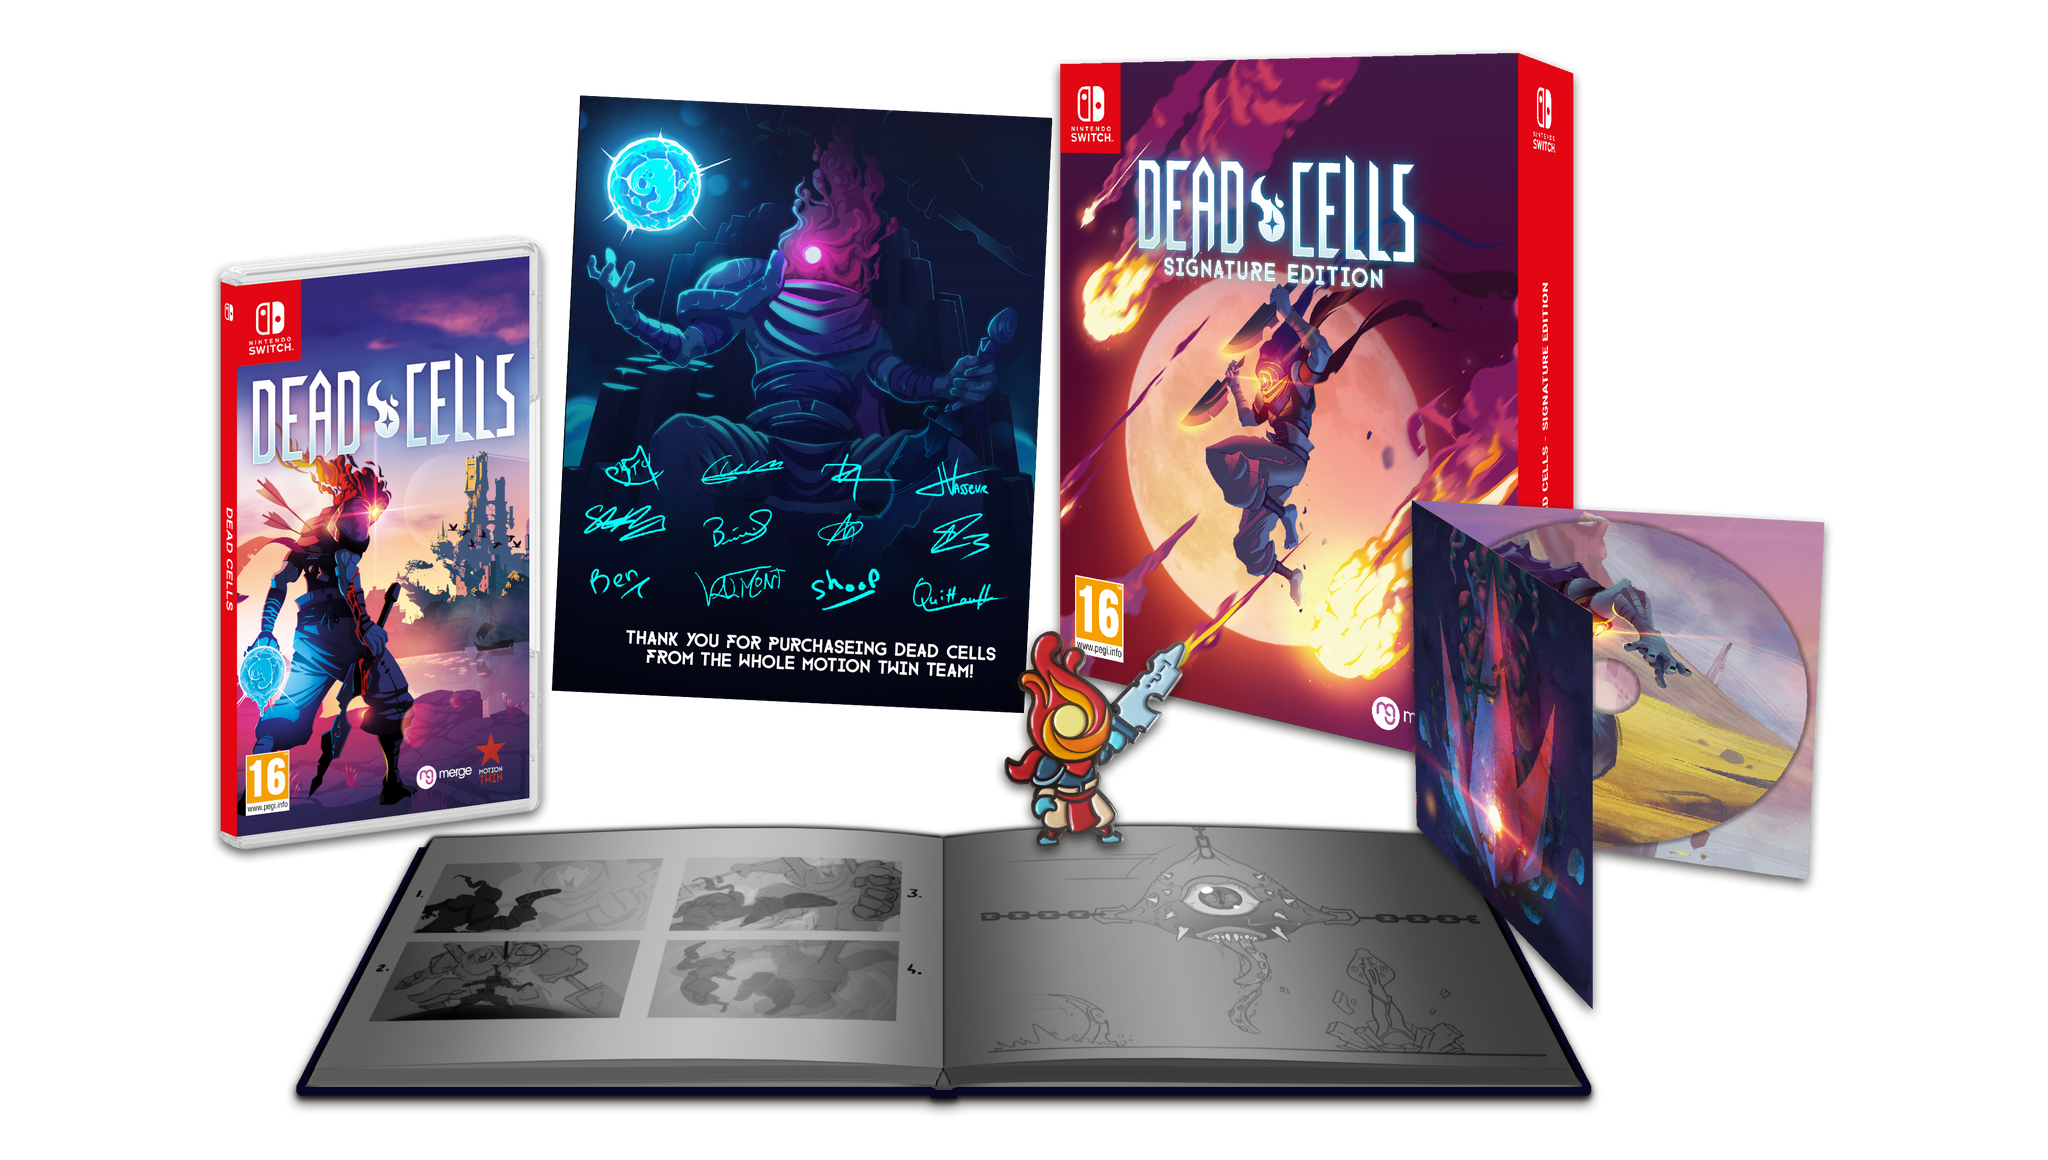 Nintendo Switch Game Deals - Dead Cells - 2018's Action Game of the Year -  Stander Edition - games Cartridge Physical Card